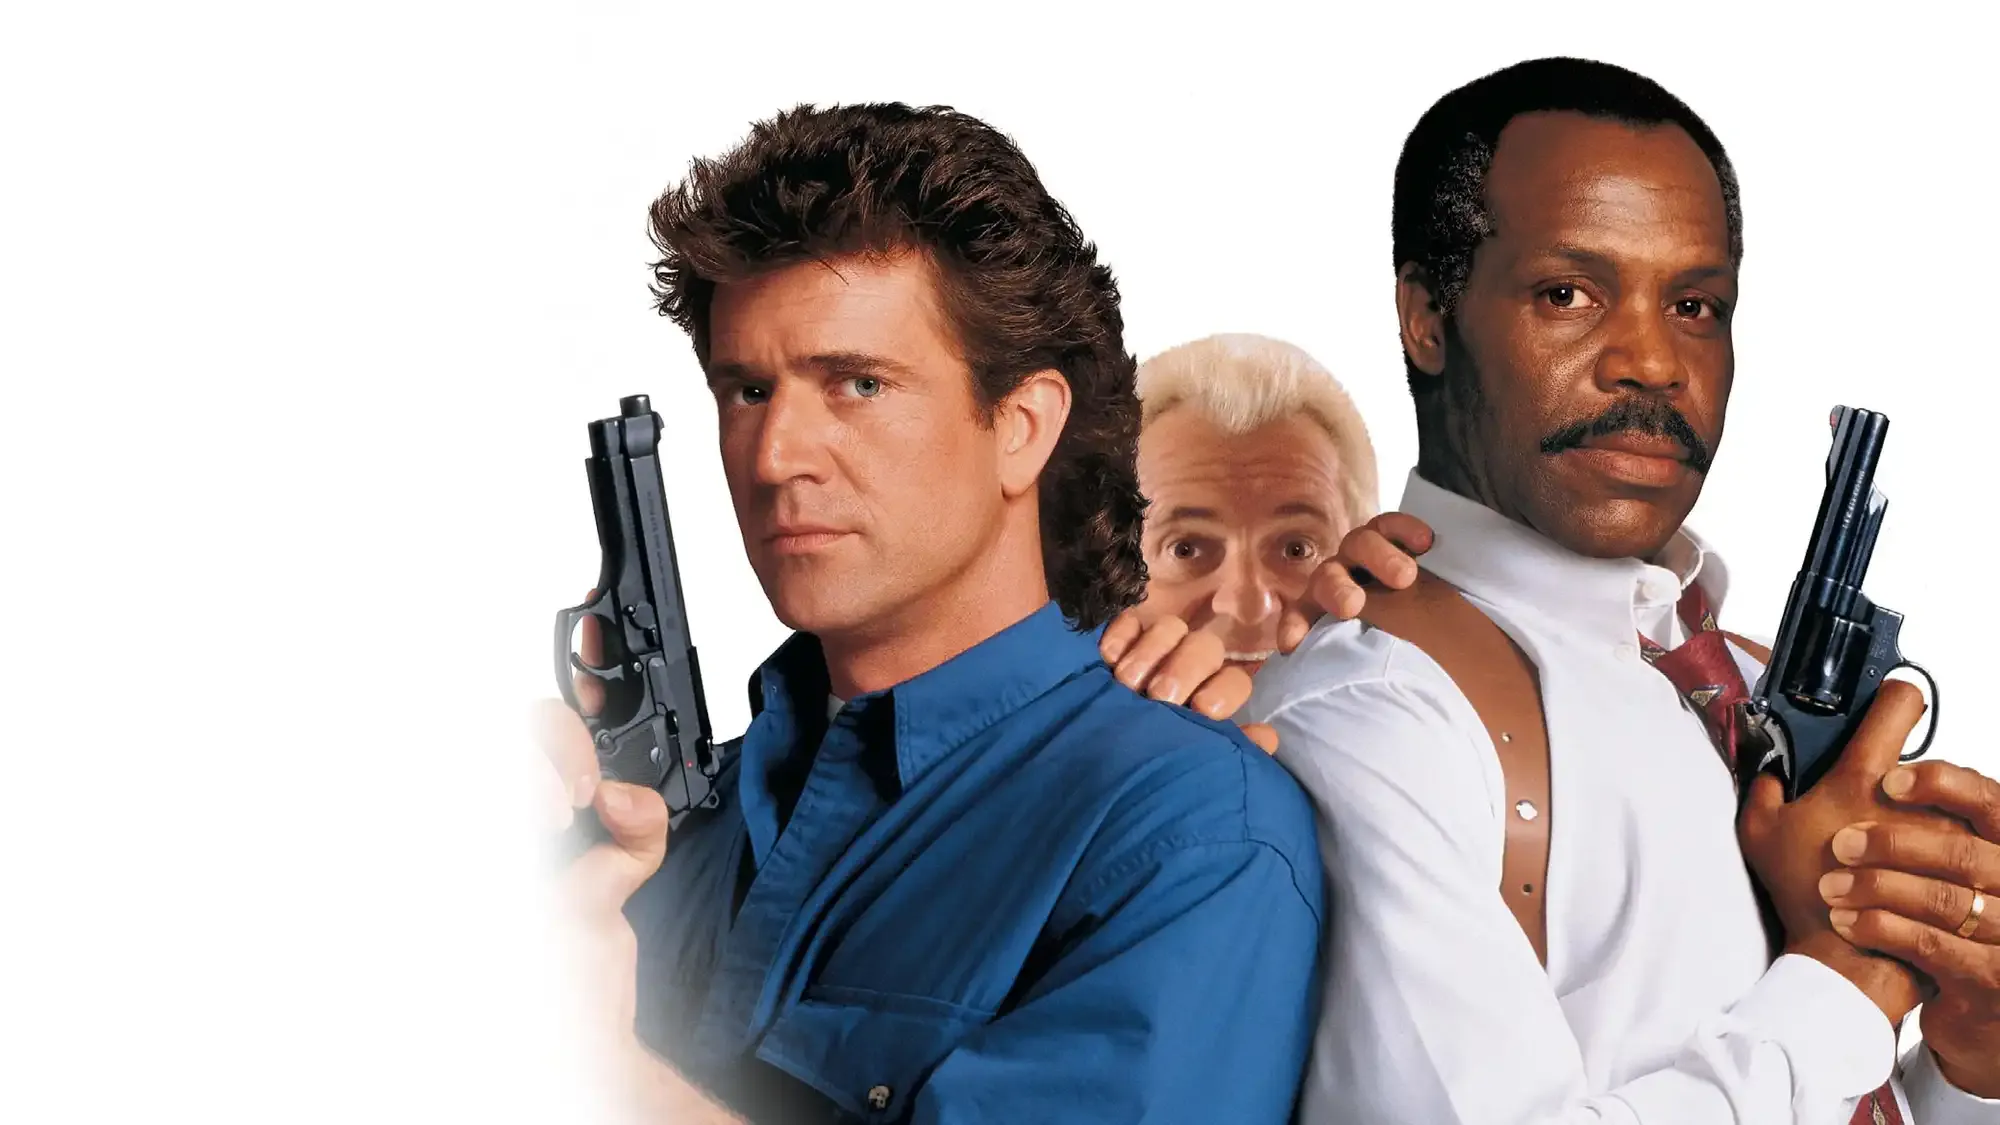 Lethal Weapon 3 movie review